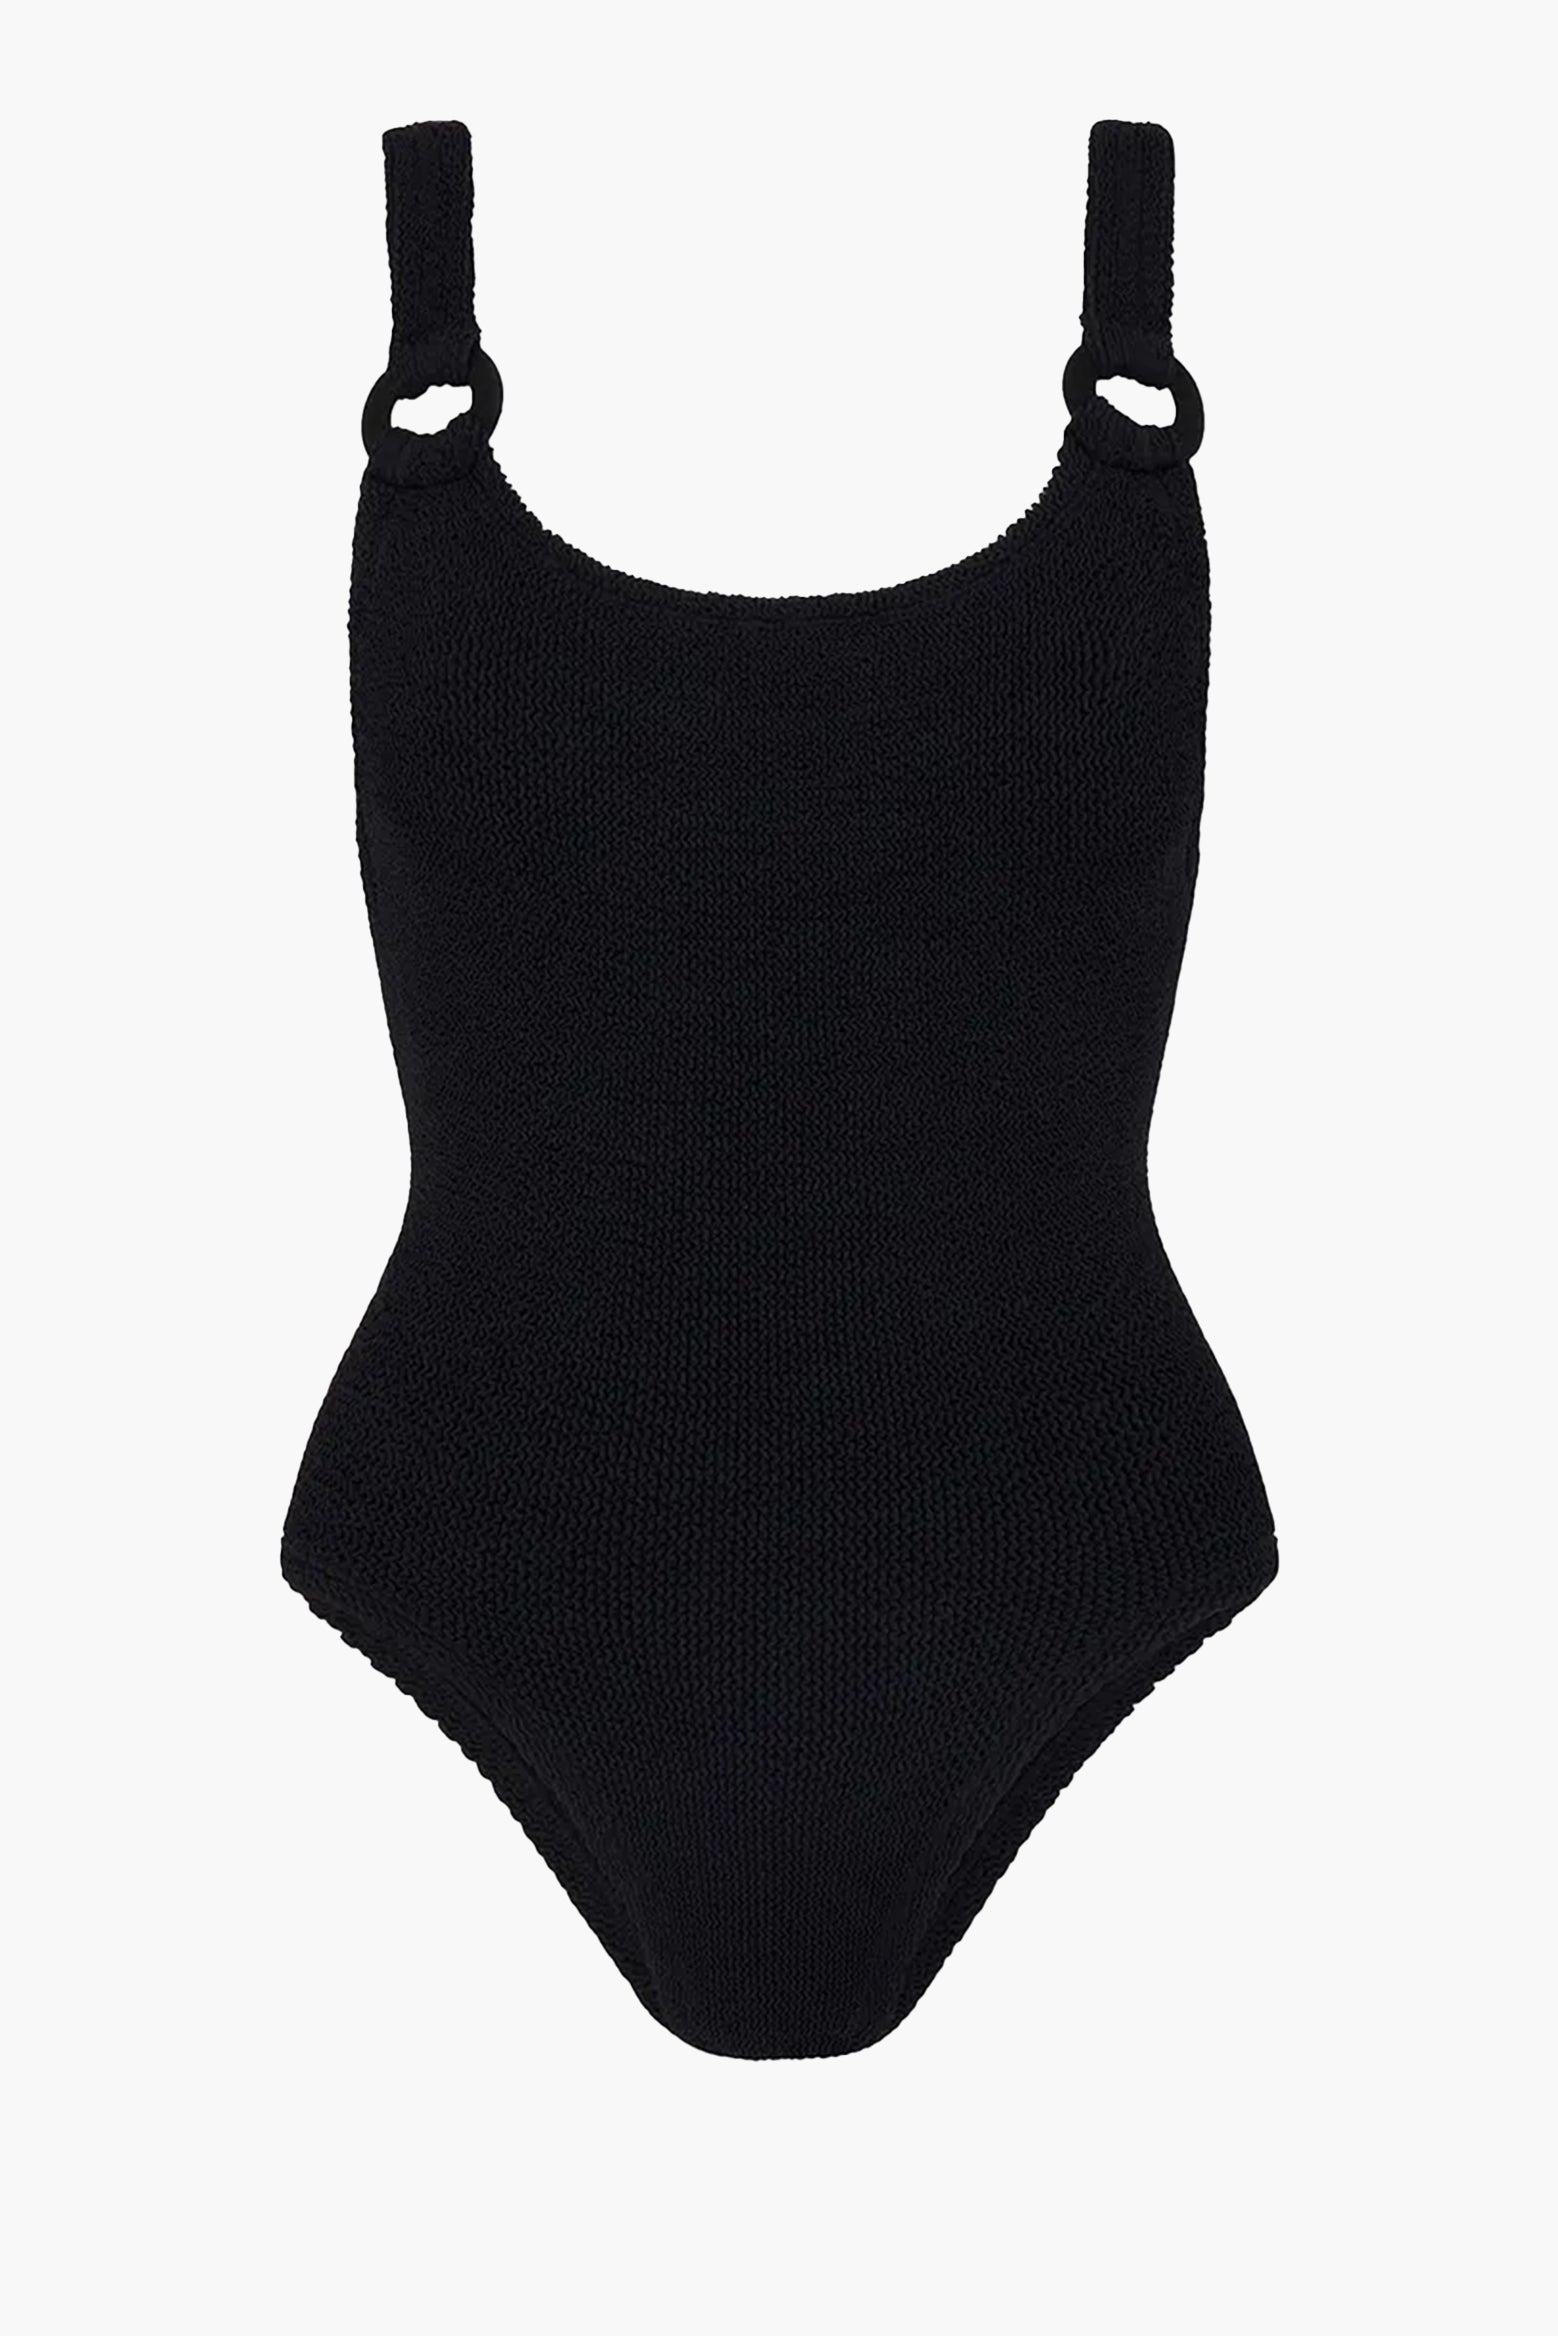 The Hunza G Domino Swim in Black available at The New Trend Australia